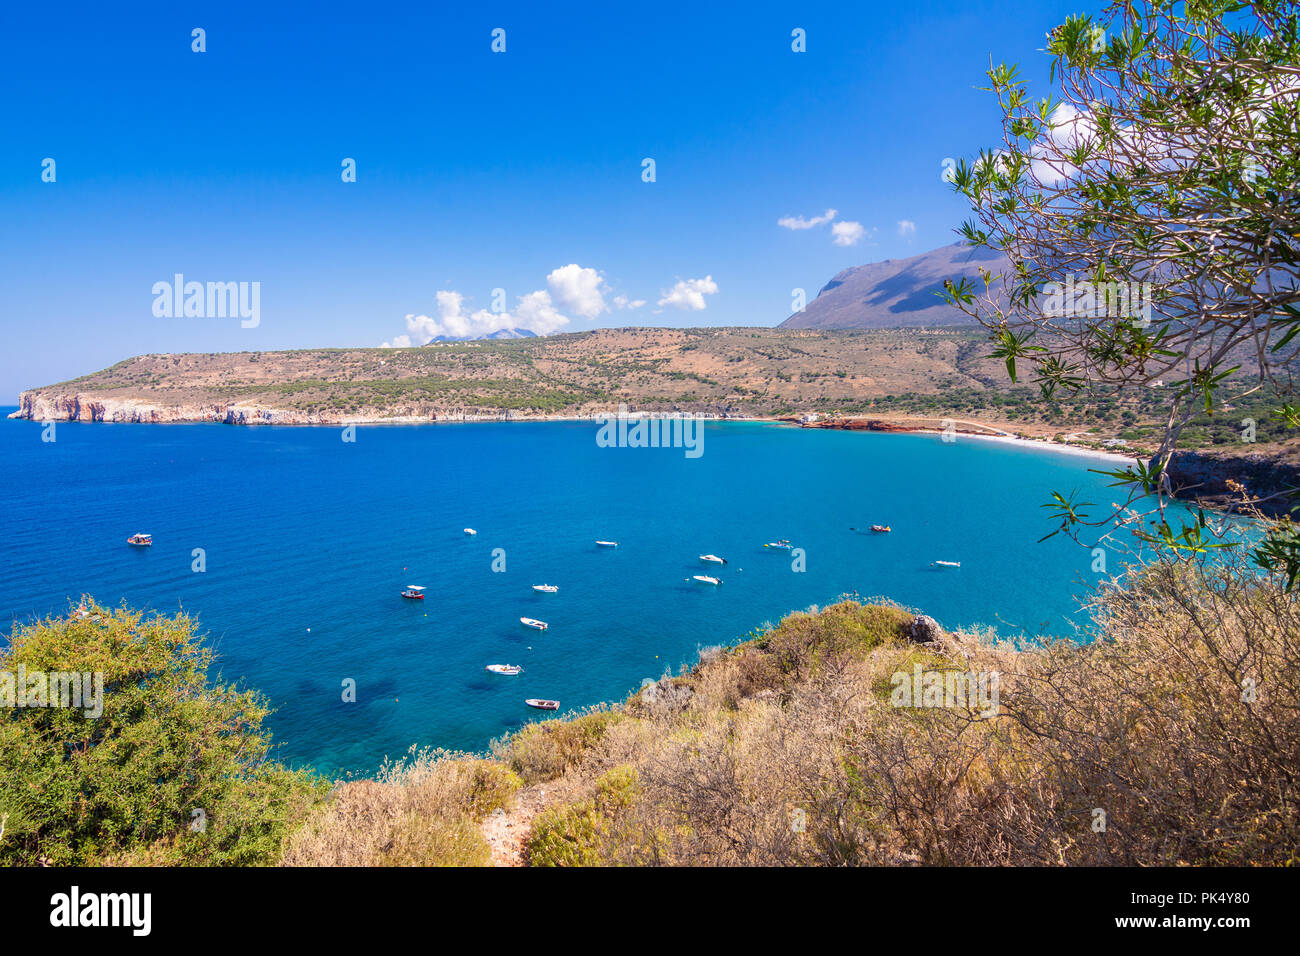 The gulf outside of the amazing caves of Dirou with fishing boats and turquoise waters, Peloponnese, Greece. Stock Photo